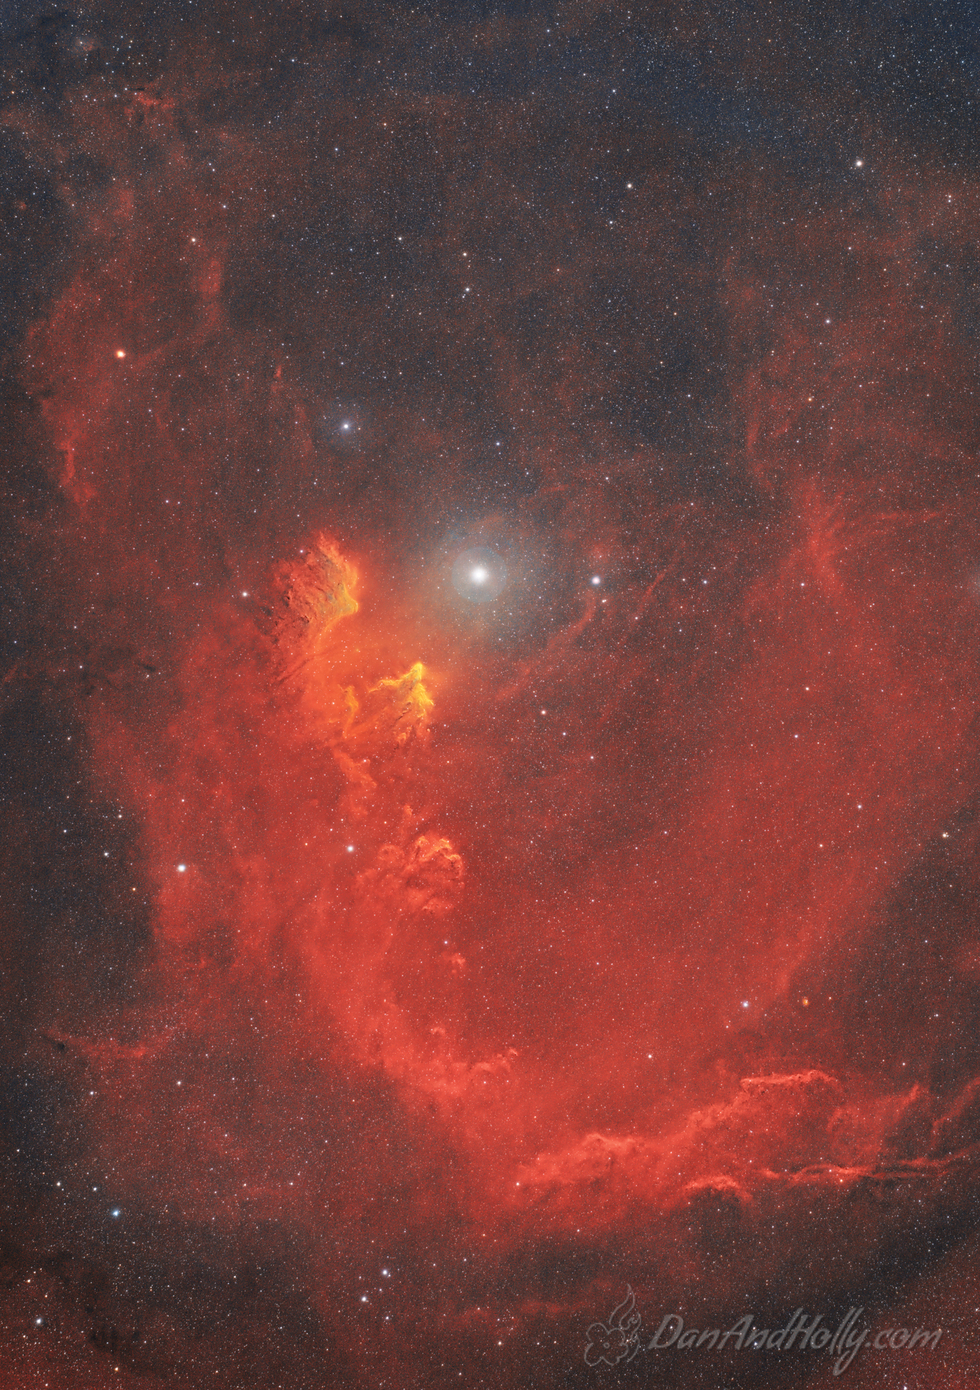 Ghosts of Cassiopeia